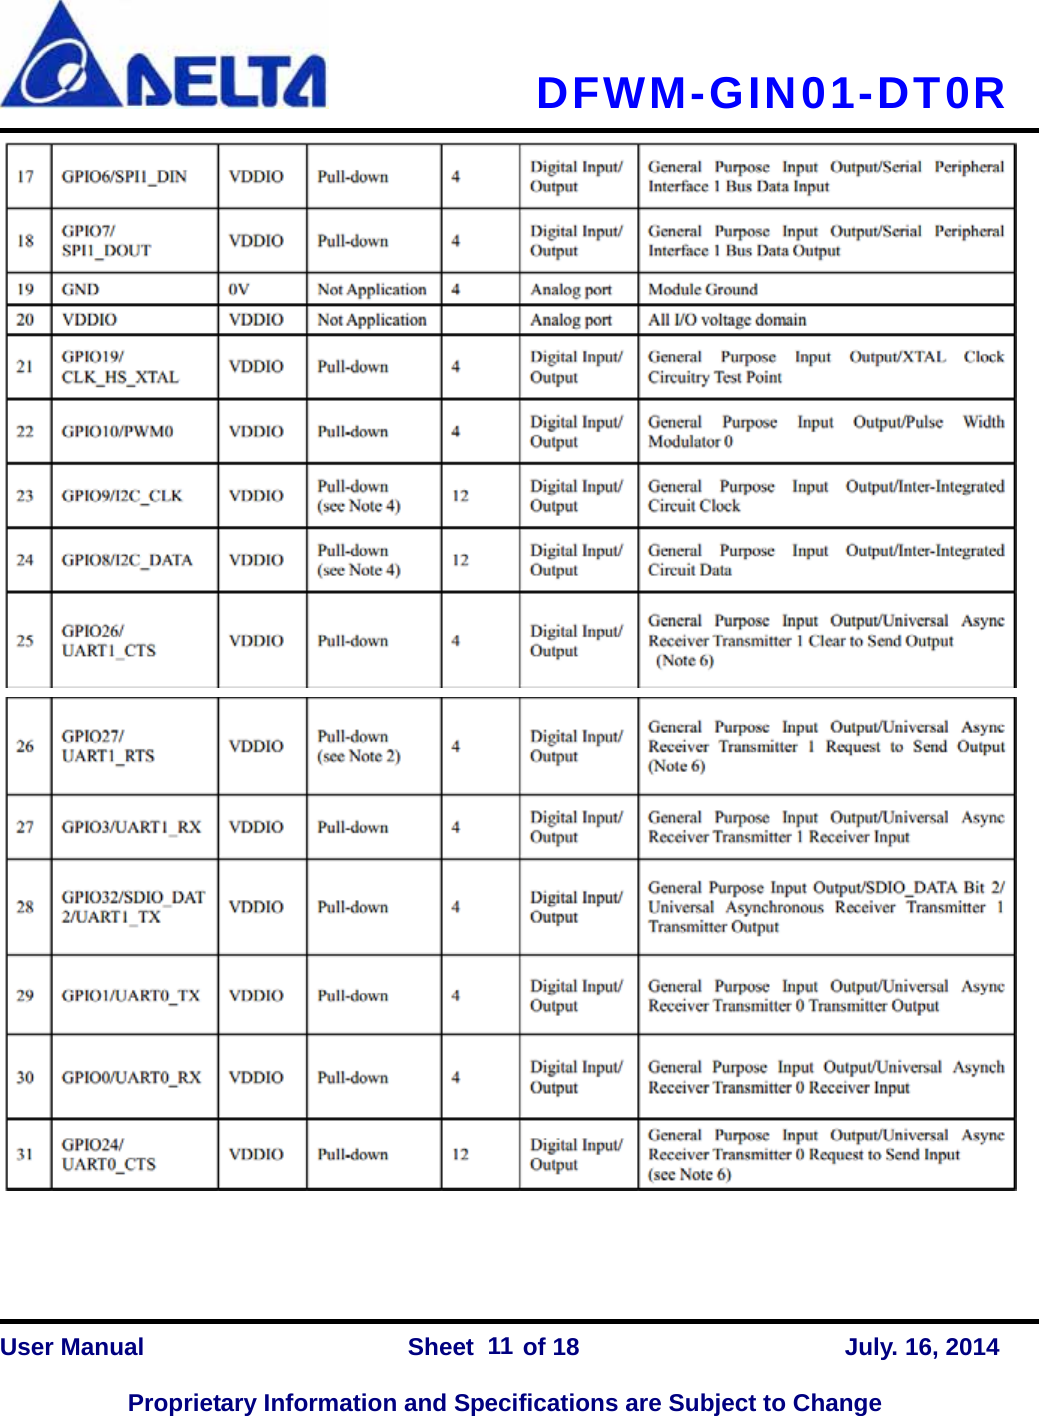   DFWM-GIN01-DT0R    User Manual                Sheet    of 18      July. 16, 2014  Proprietary Information and Specifications are Subject to Change 11    